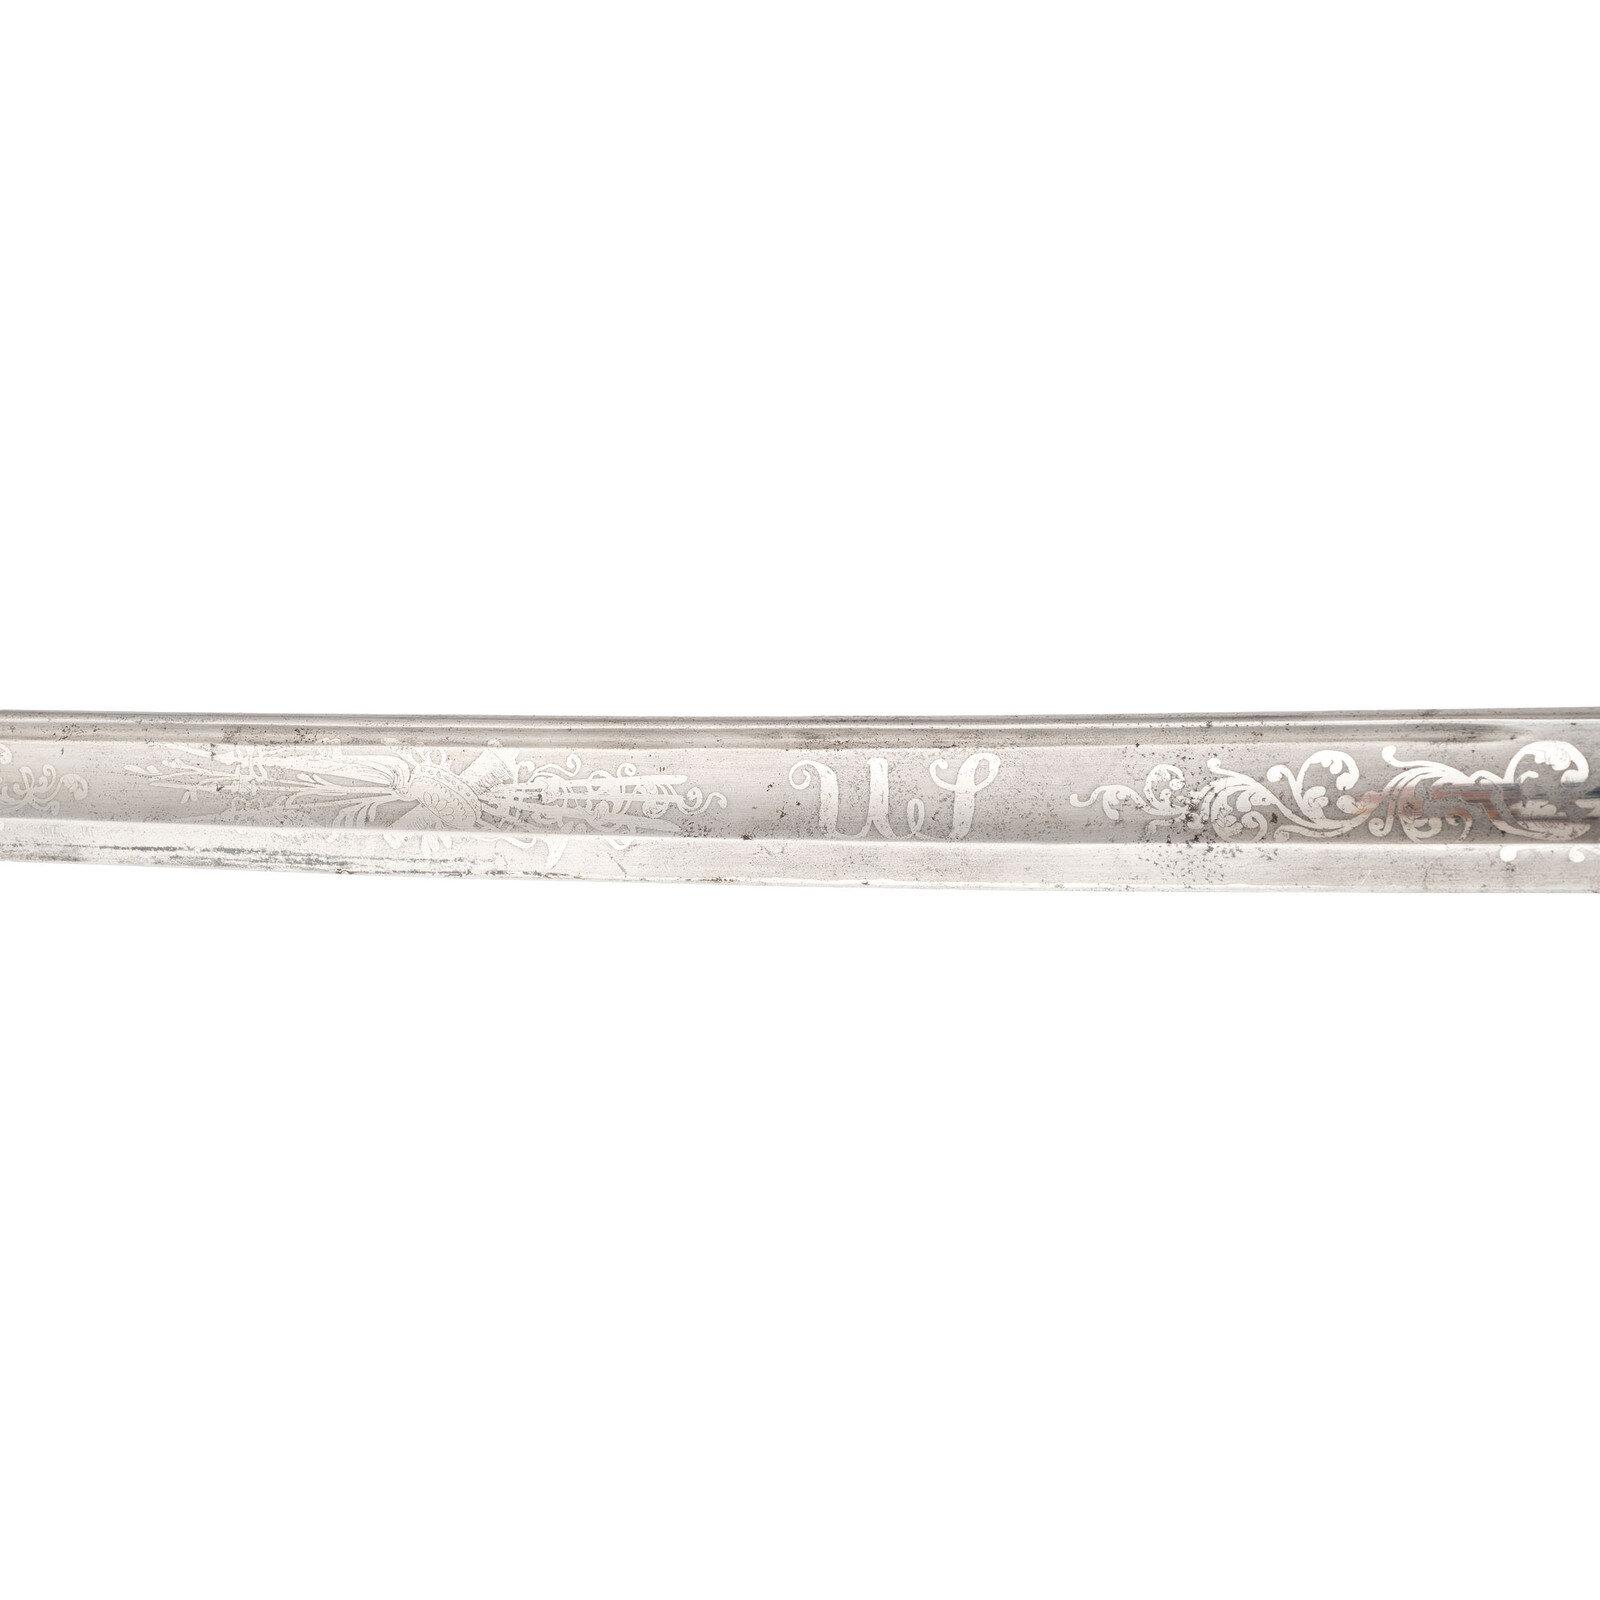 US Model 1850 Foot Officer's Sword Inscribed to CHT - Charles H. Tobey - WIA, POW Petersburg